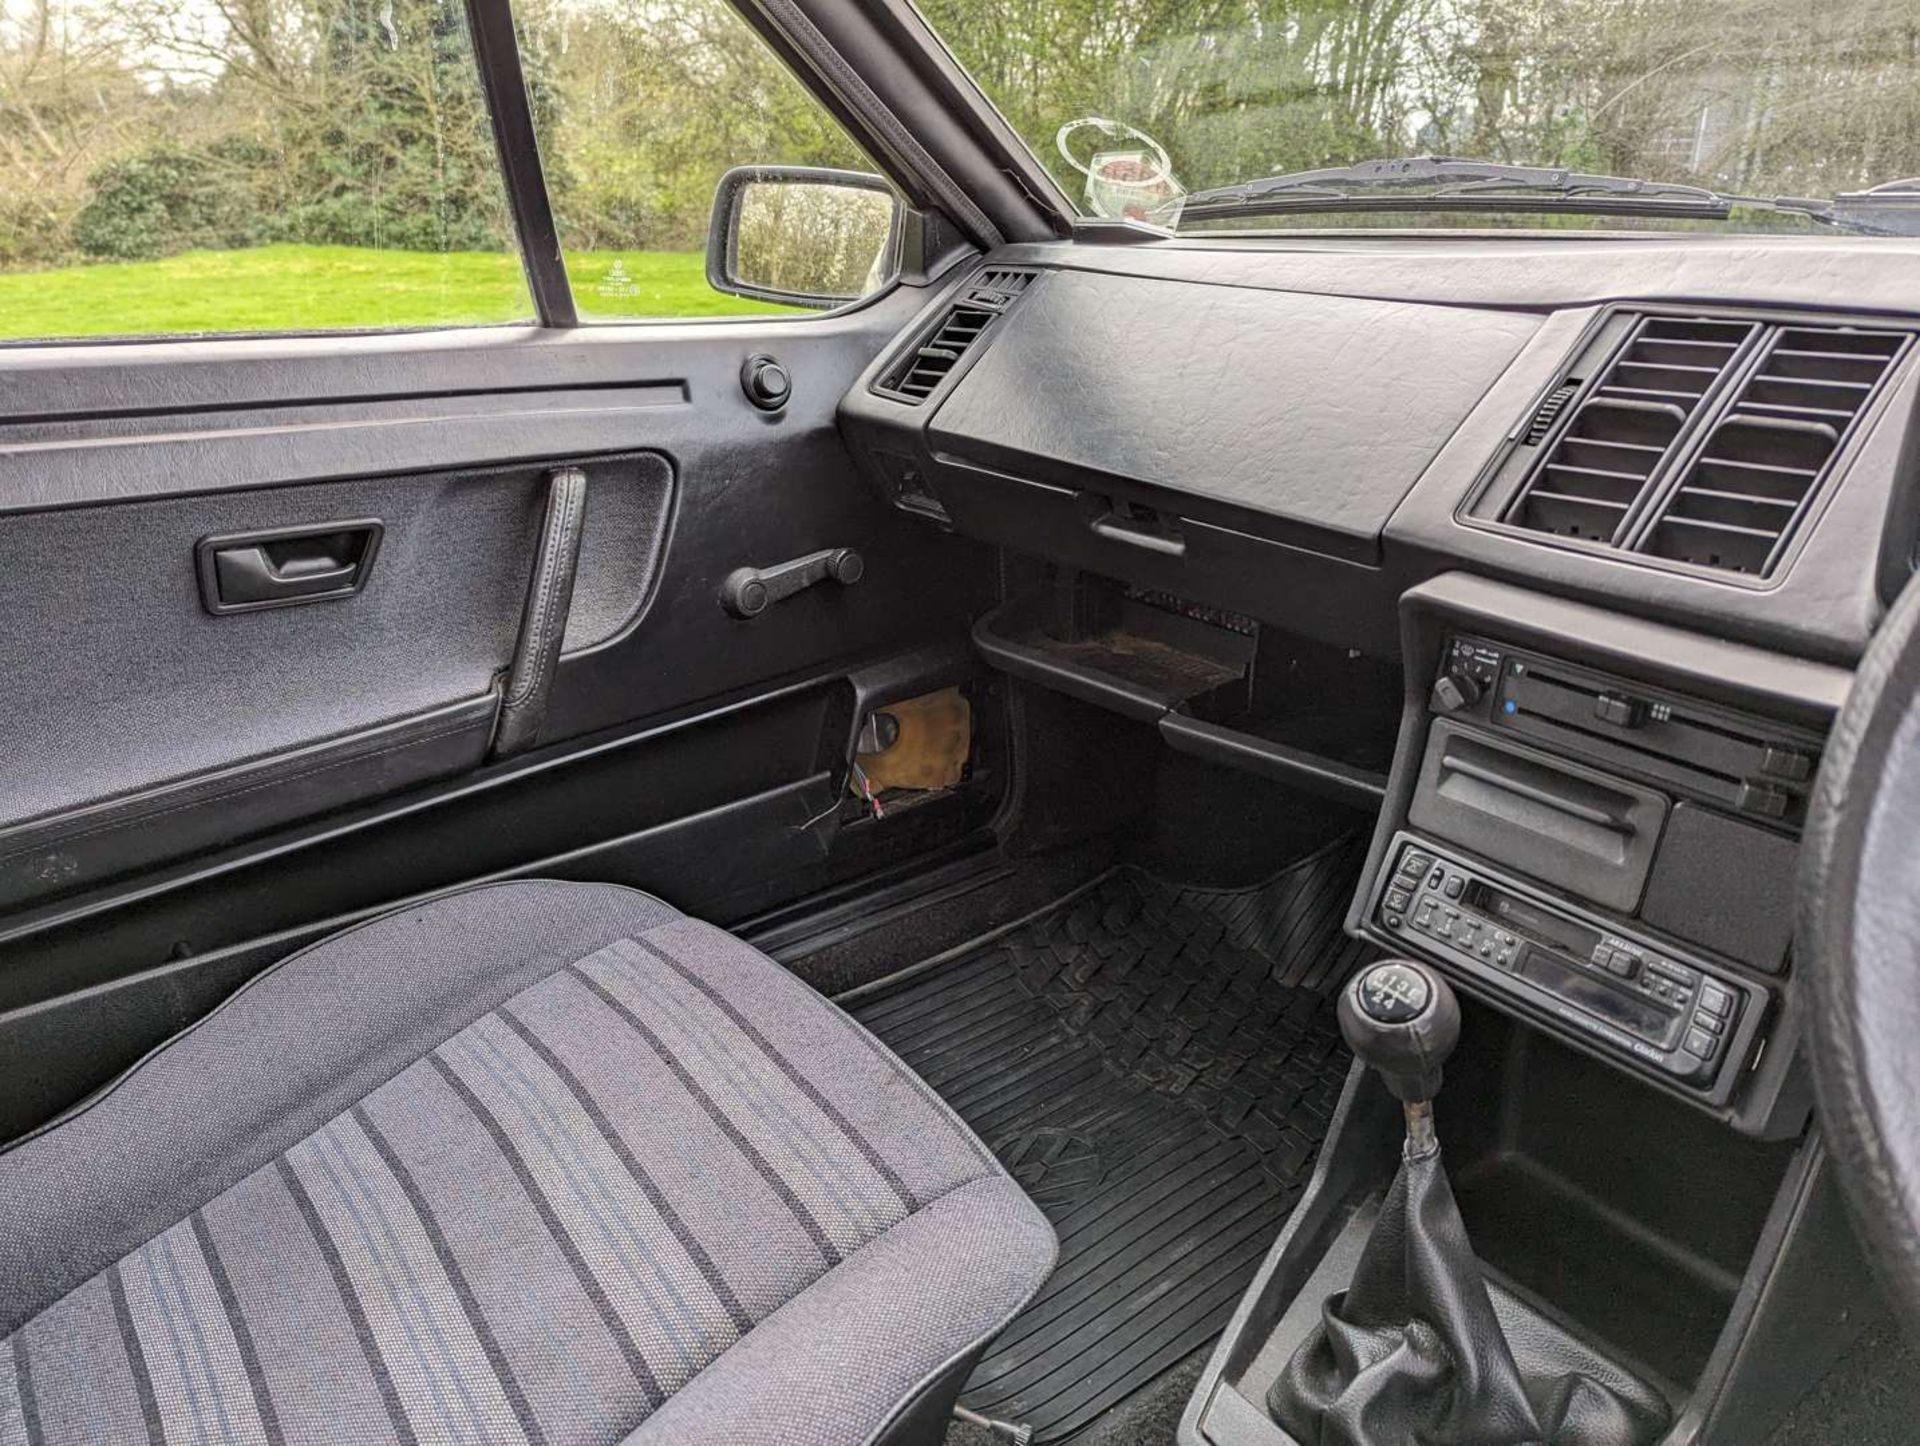 1987 VW SCIROCCO GT - Image 20 of 28